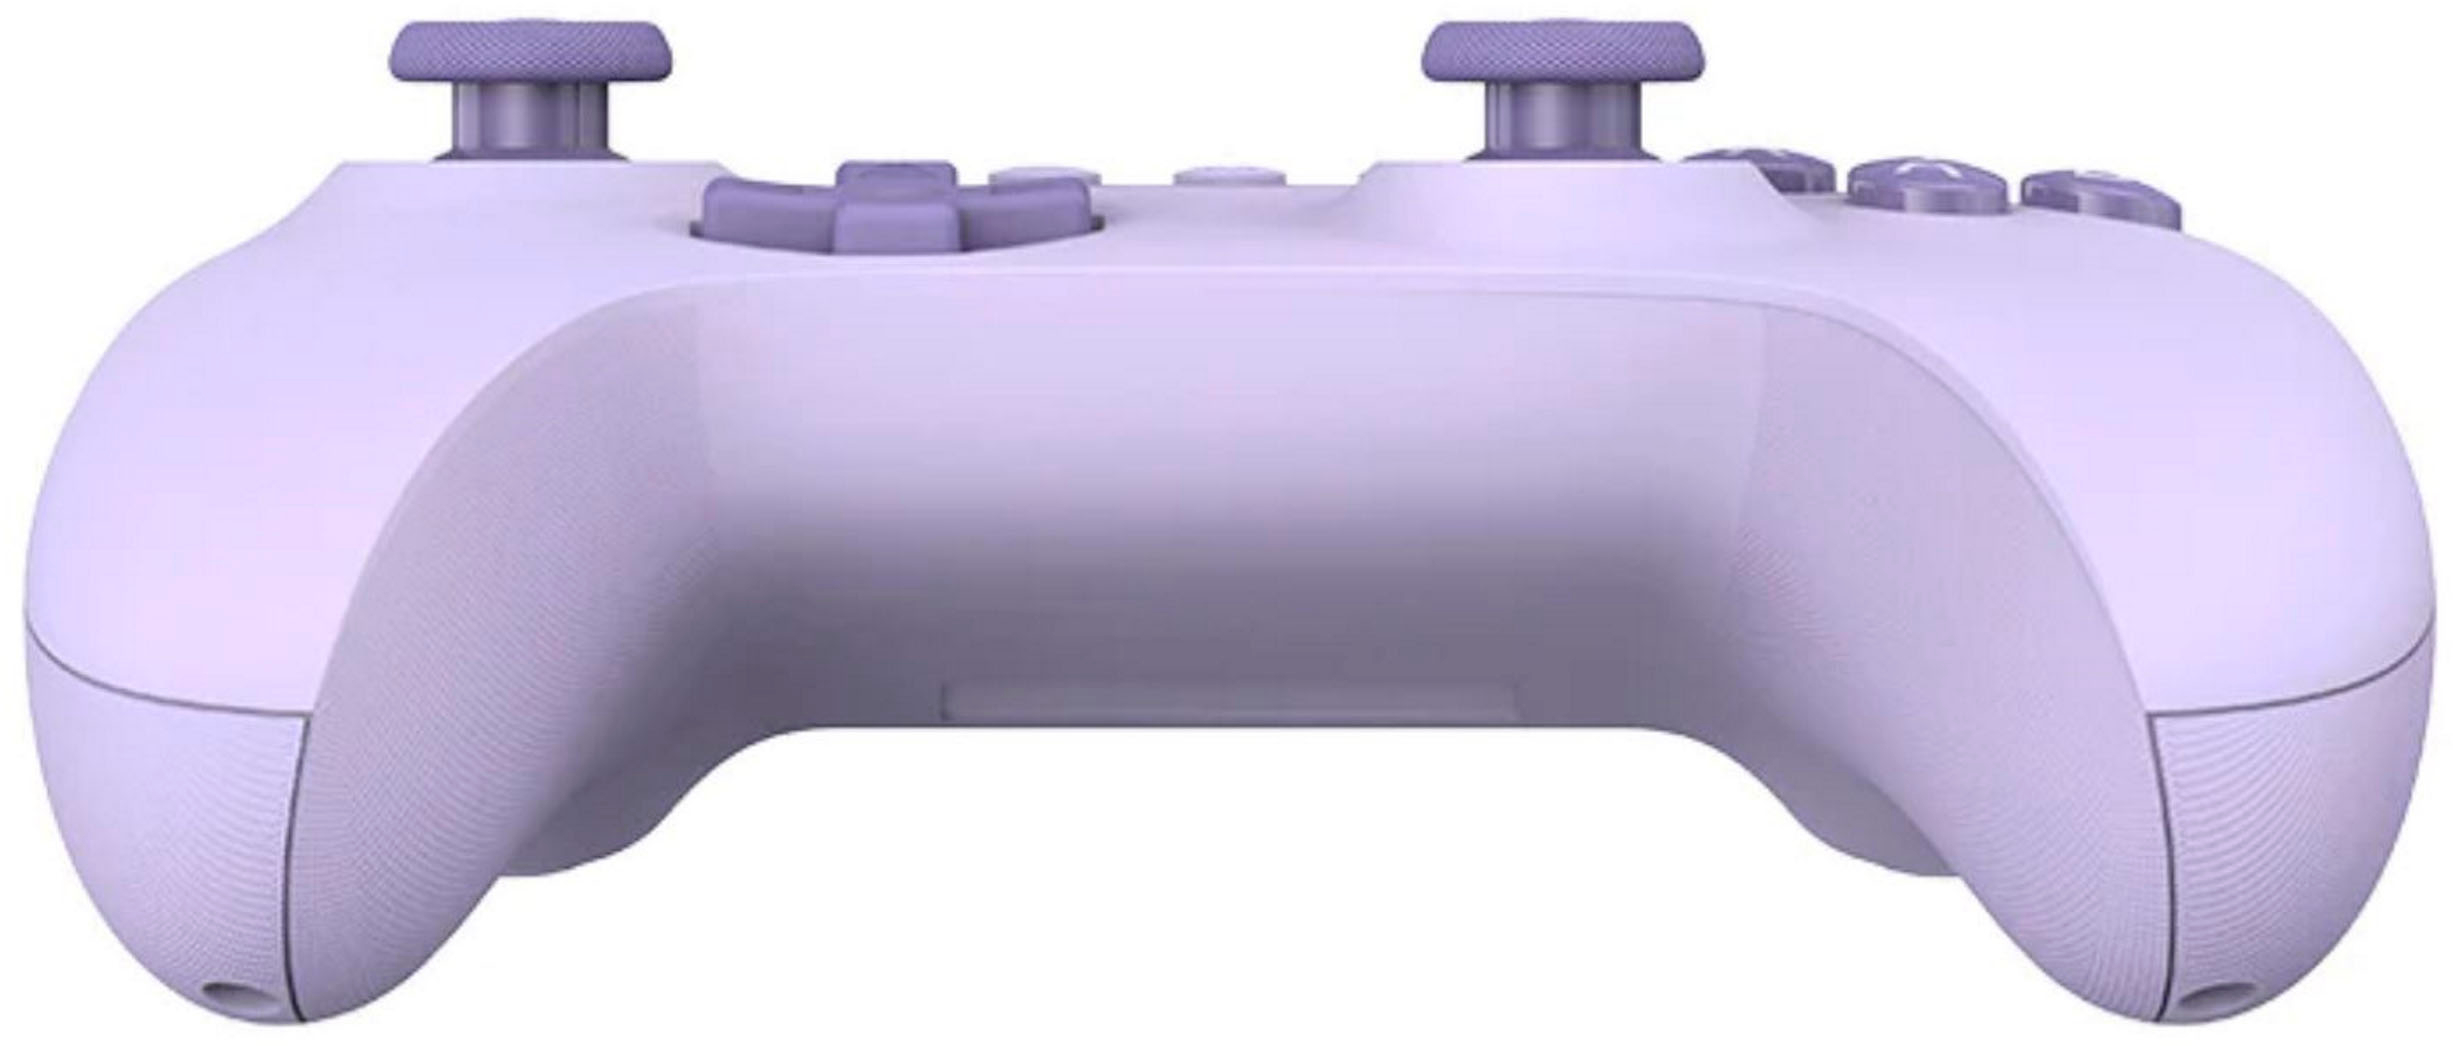 8BitDo Ultimate C 2.4g Wireless Controller, Dual Connectivity 2.4g & USB,  Low Latency, Plug-and-Play, Wide Compatibility, Lilac Purple